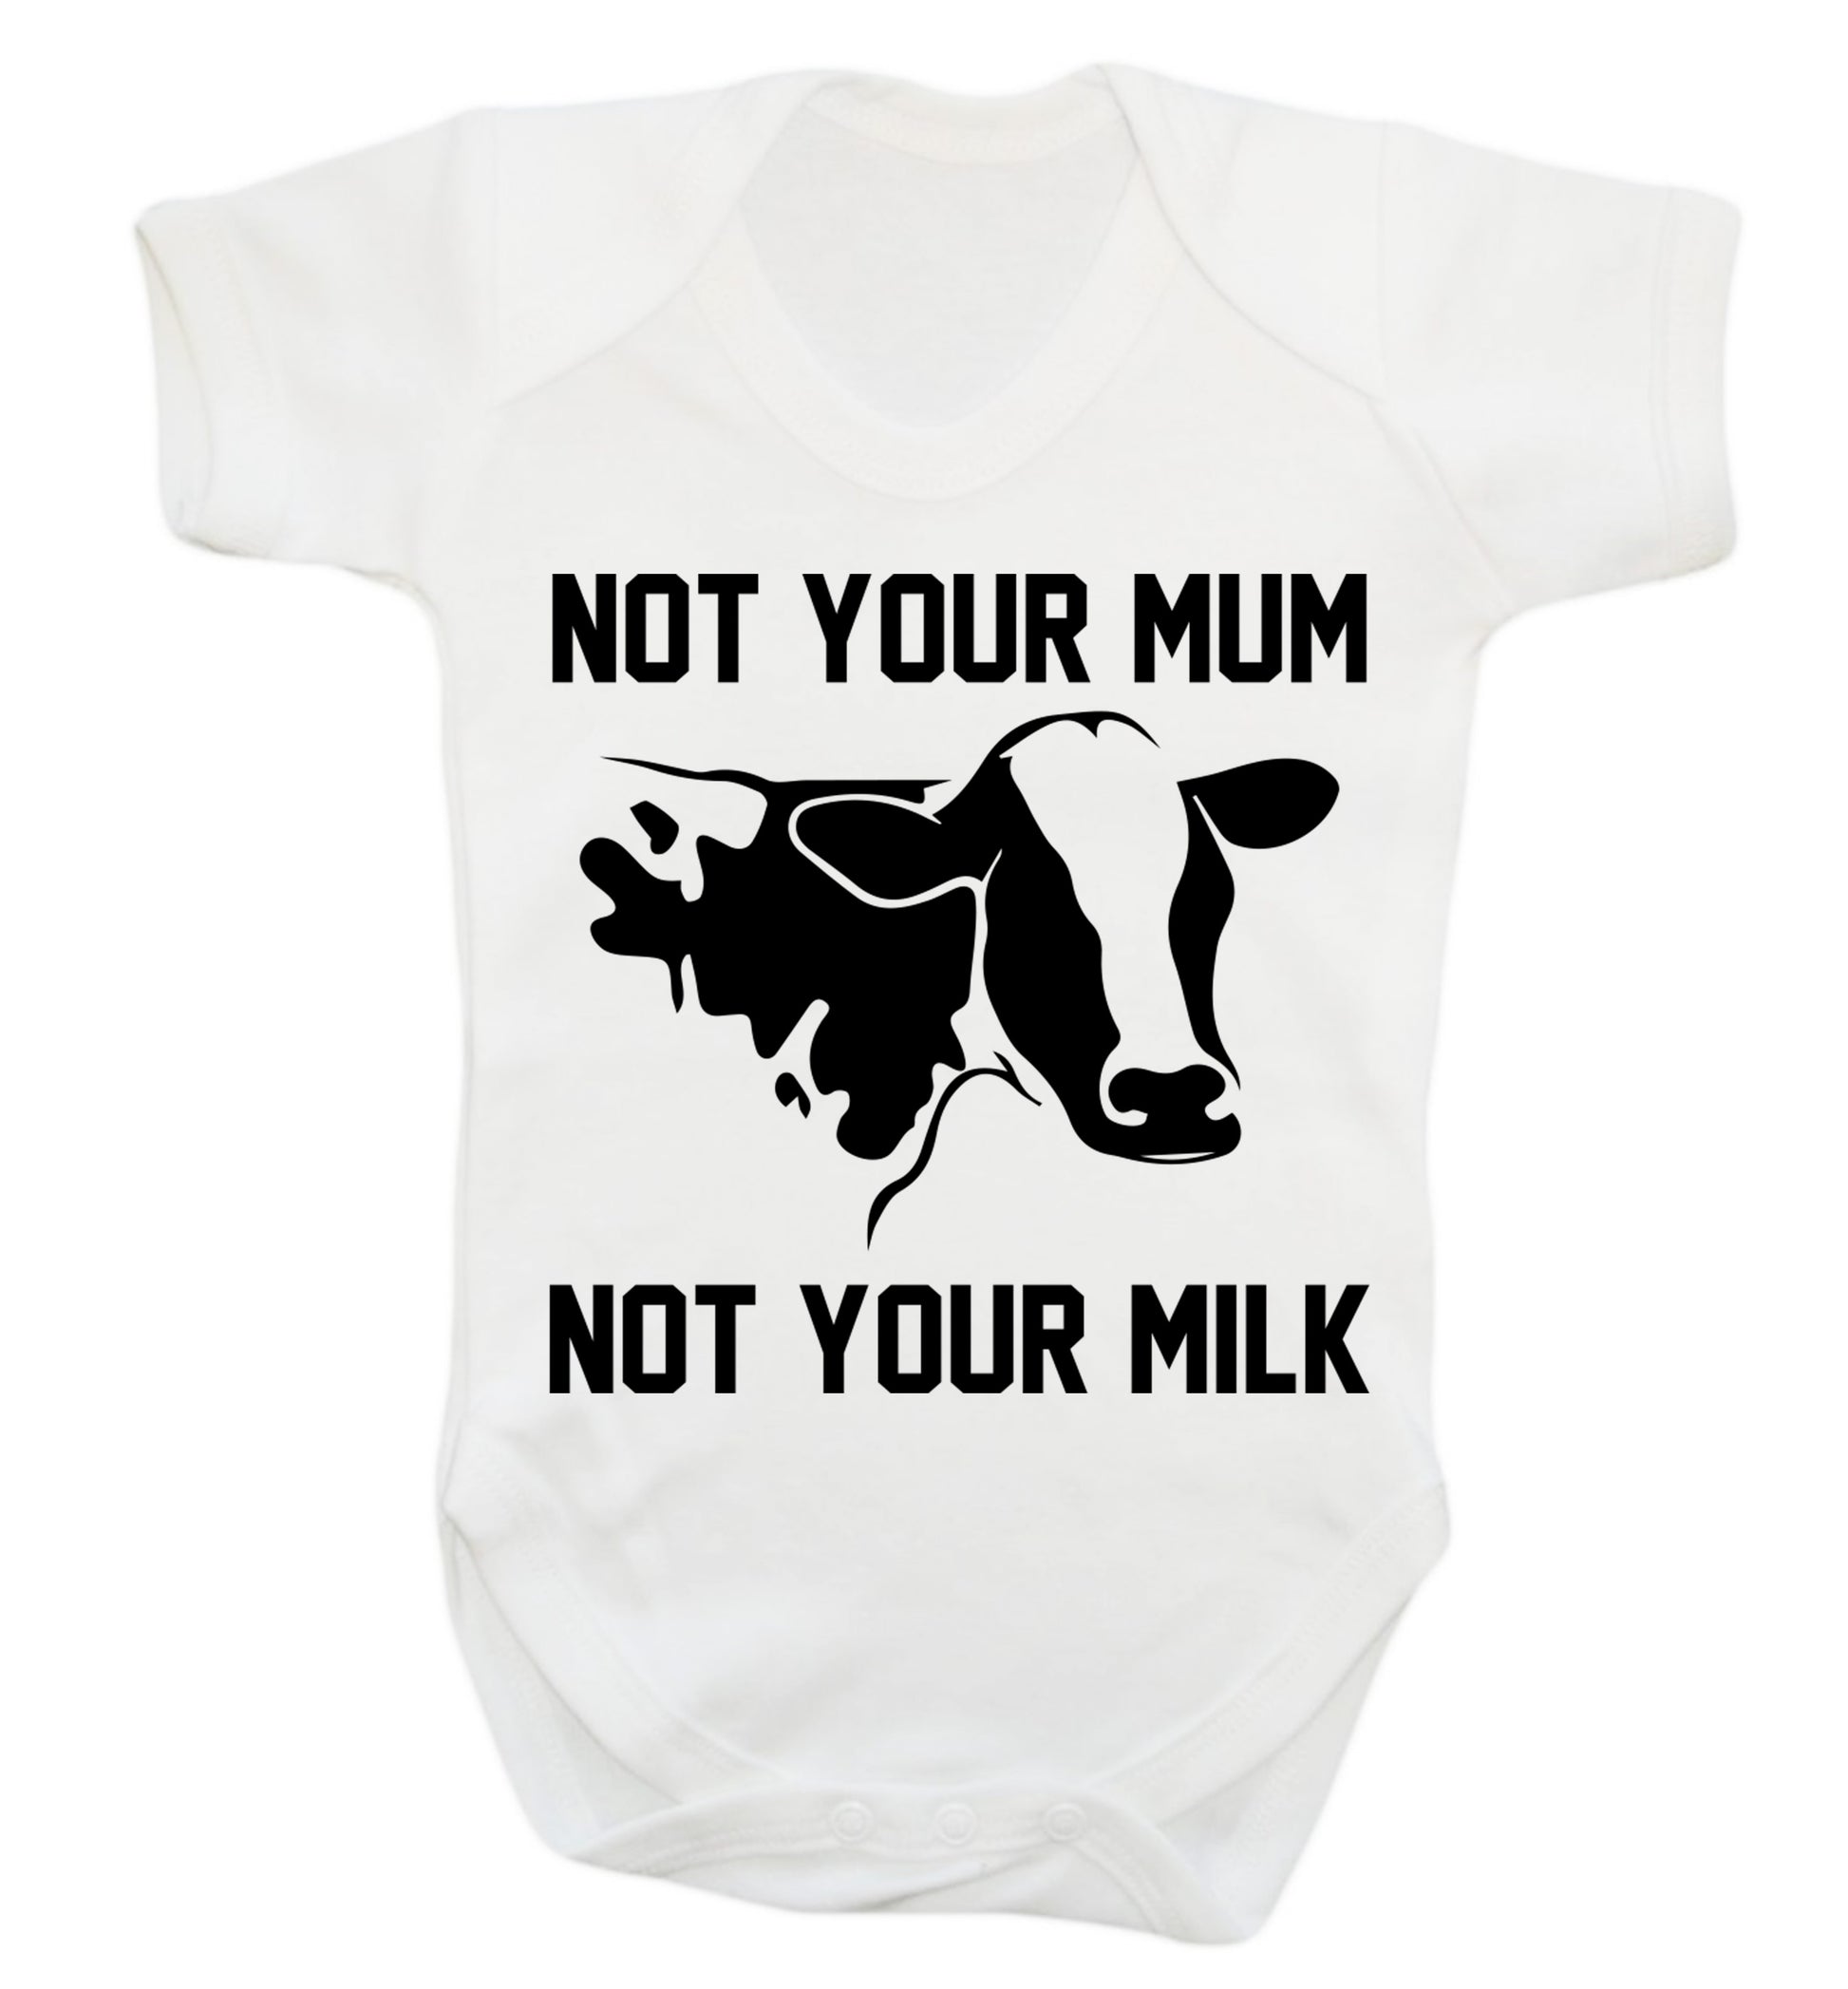 Not your mum not your milk Baby Vest white 18-24 months